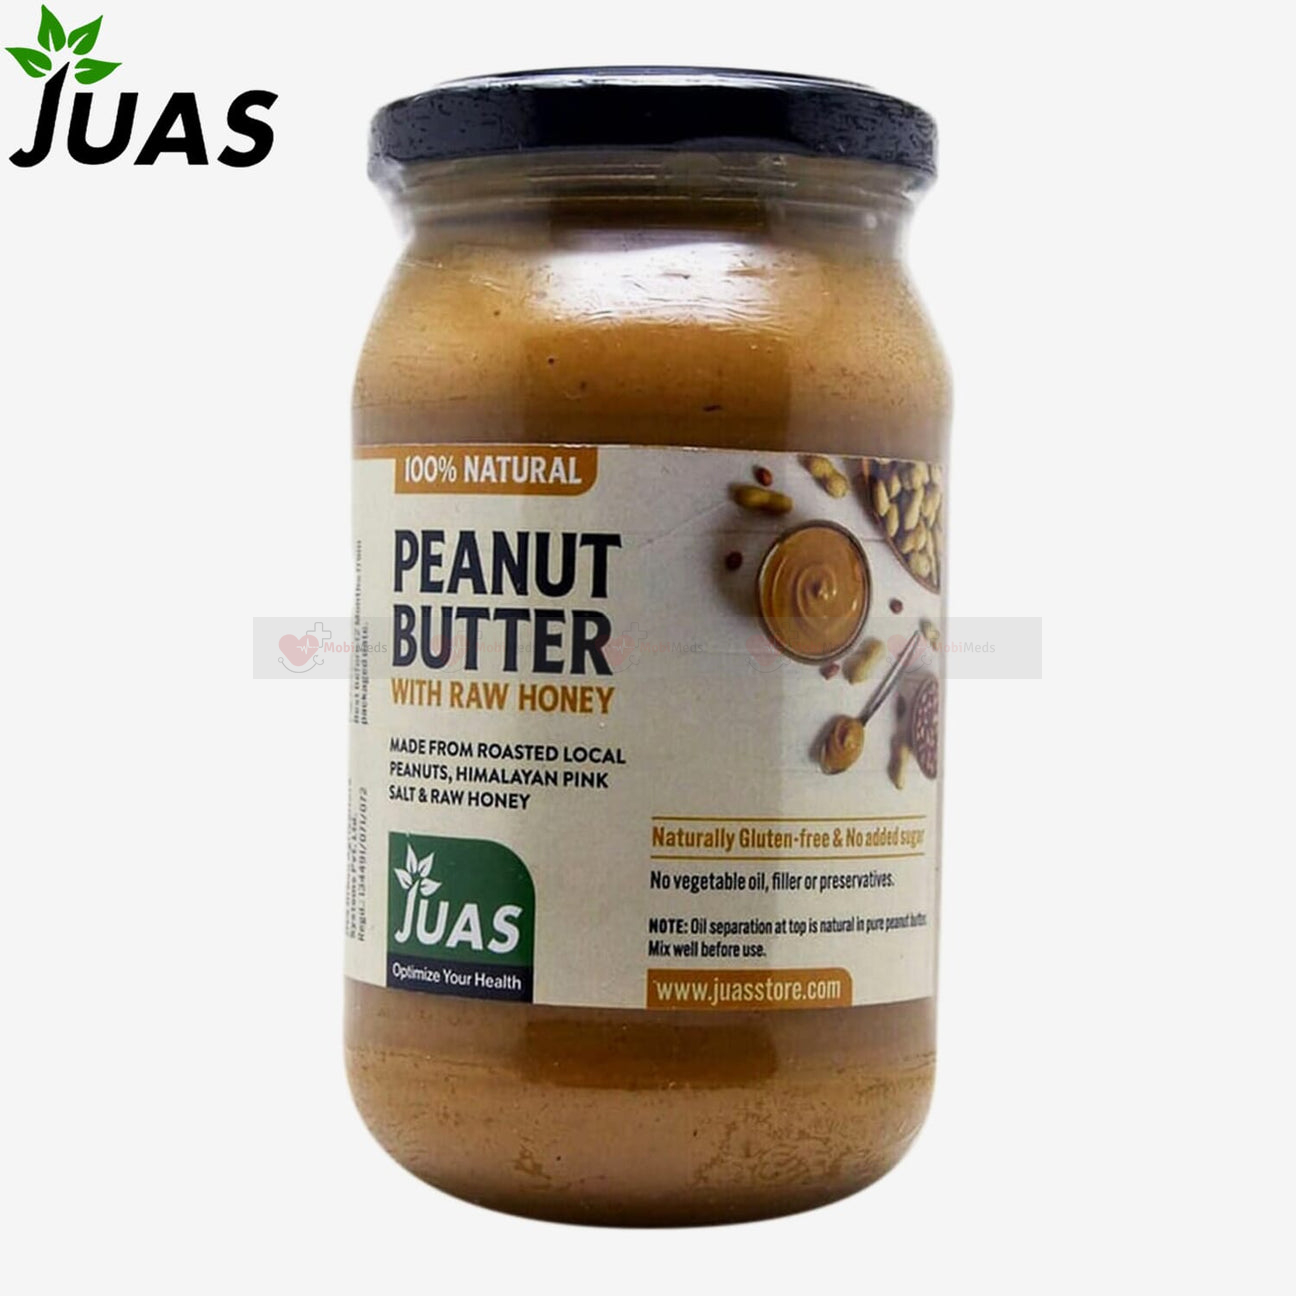 JUAS Peanut Butter With Raw Honey (All Natural) 395gm